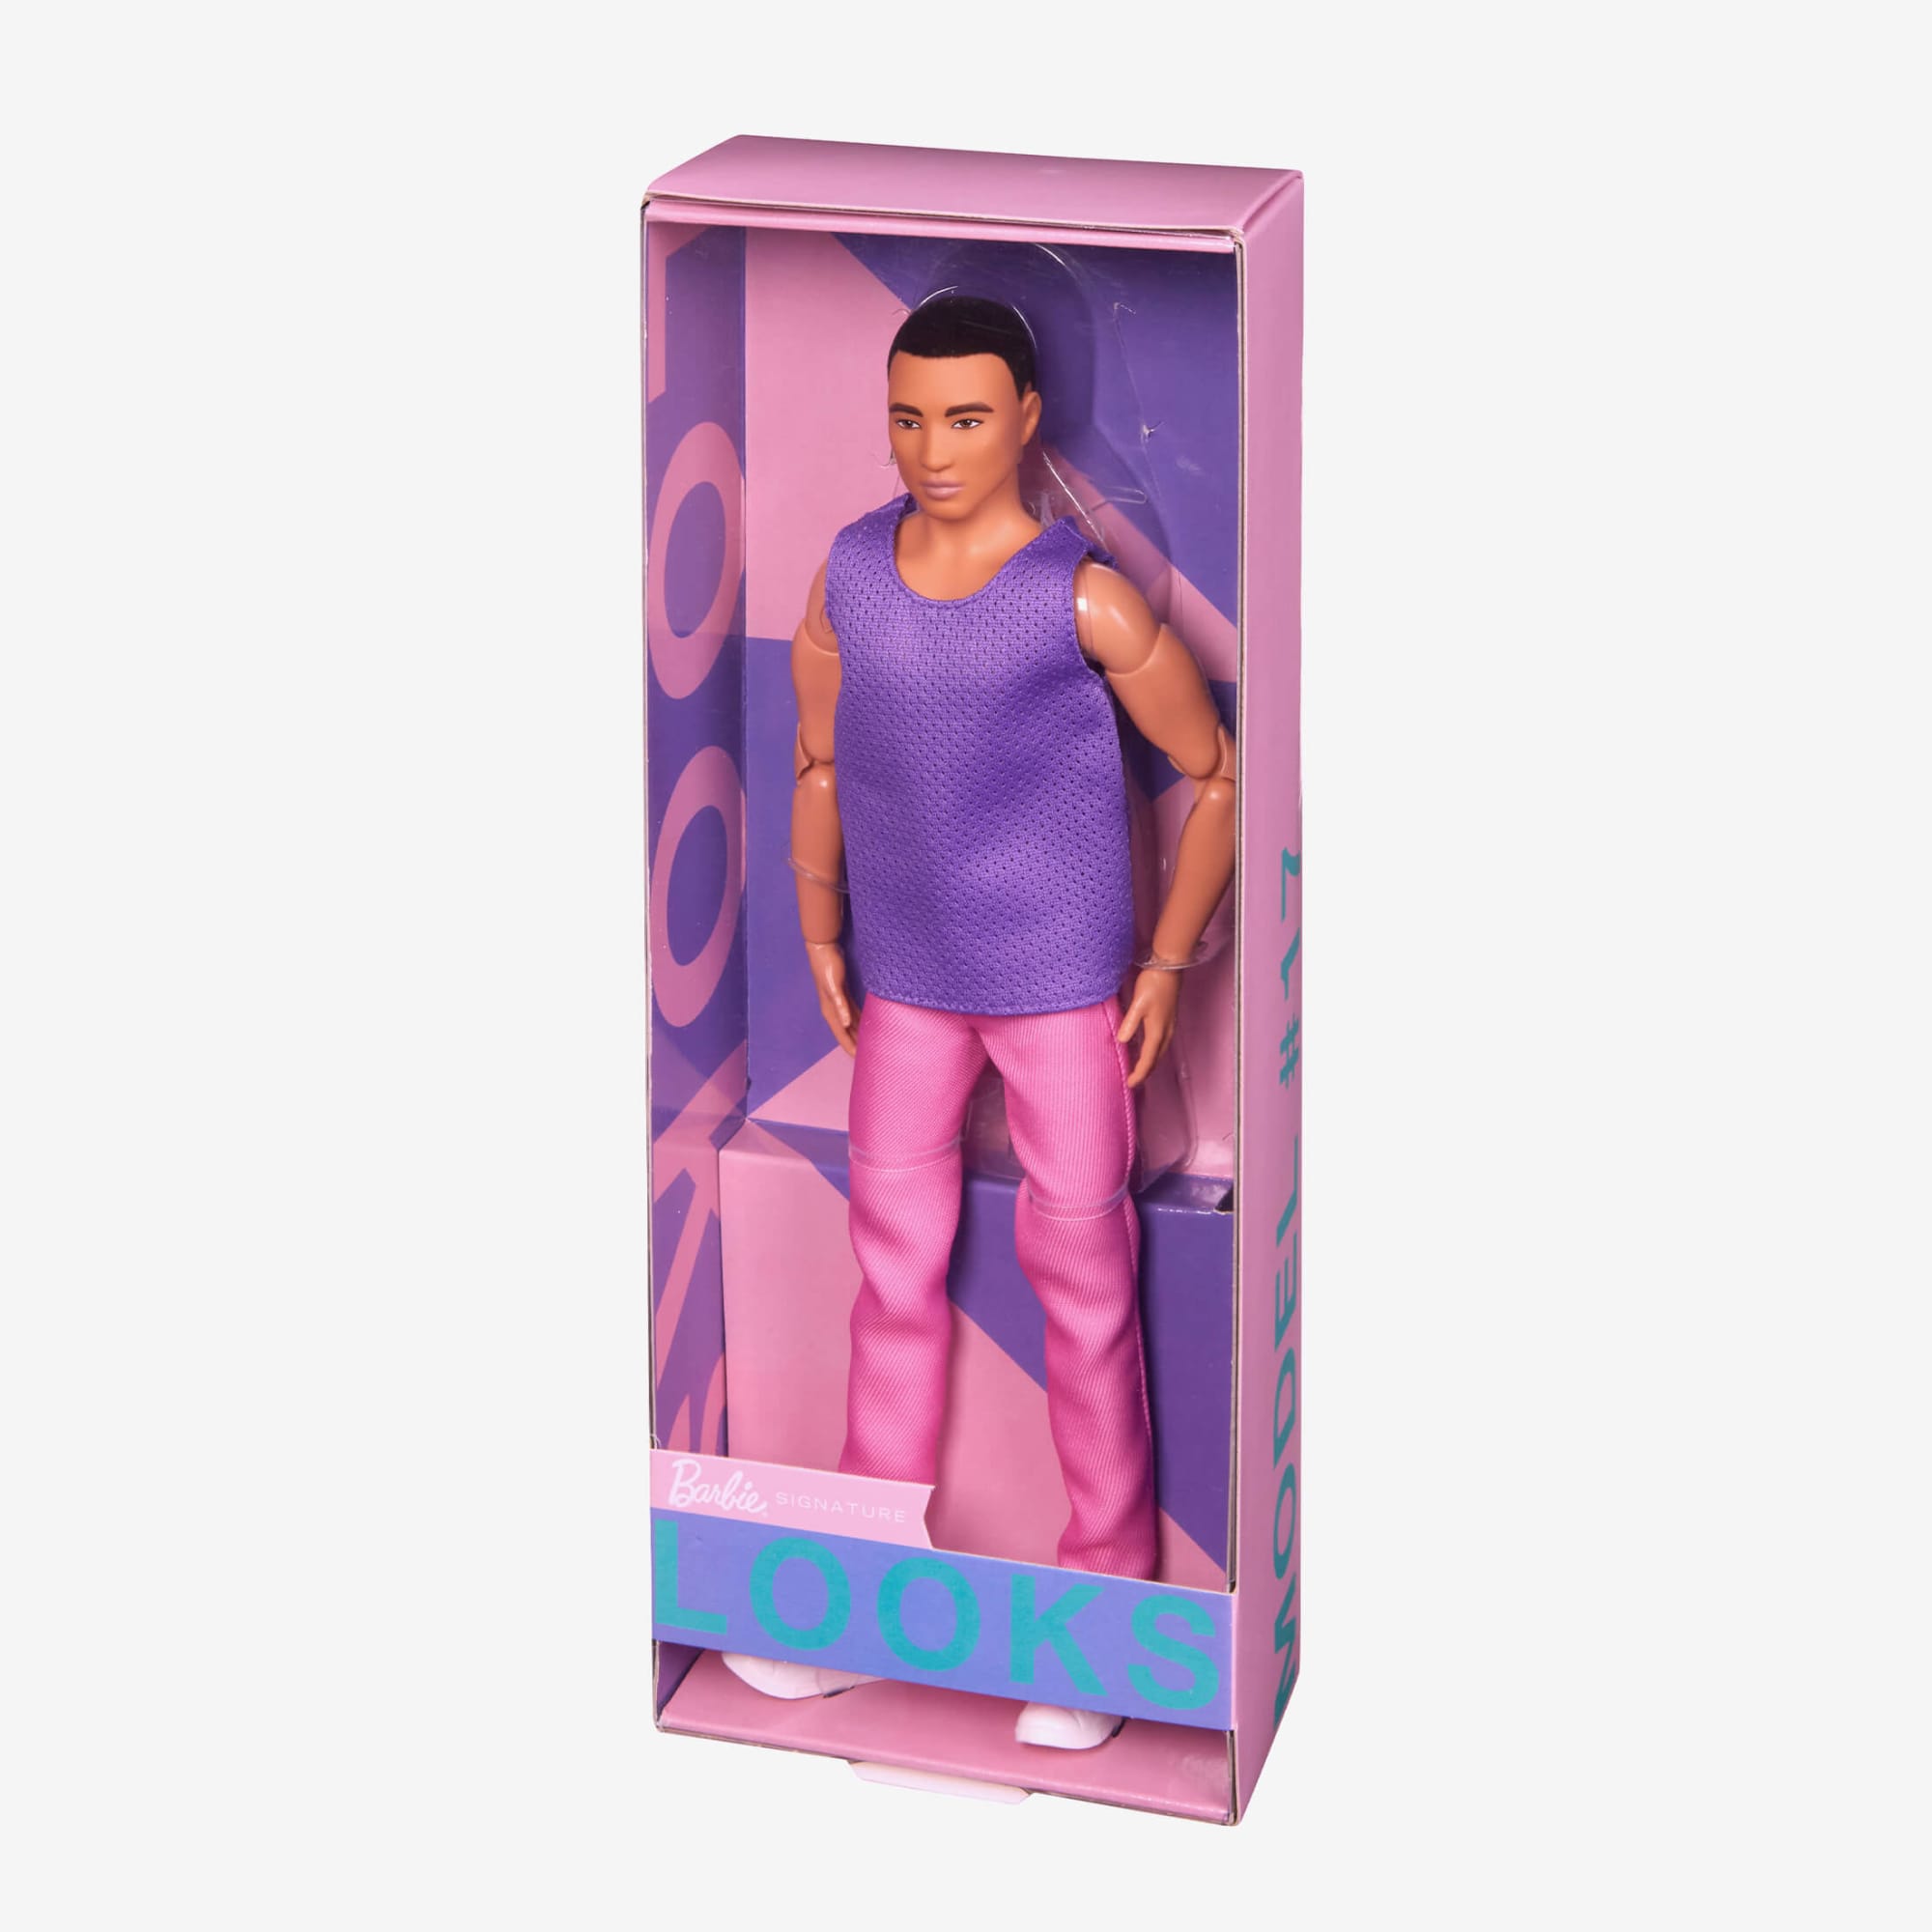 Ken from barbie wearing total black rick owens and balenciaga